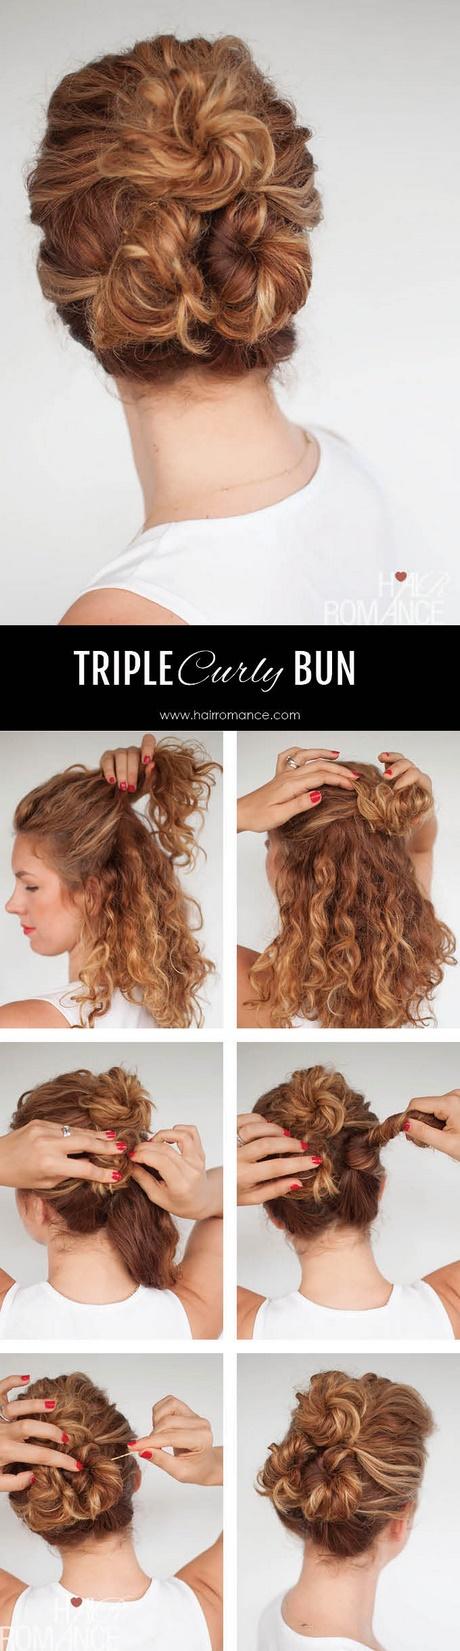 Easy everyday hairstyles for curly hair easy-everyday-hairstyles-for-curly-hair-71_11